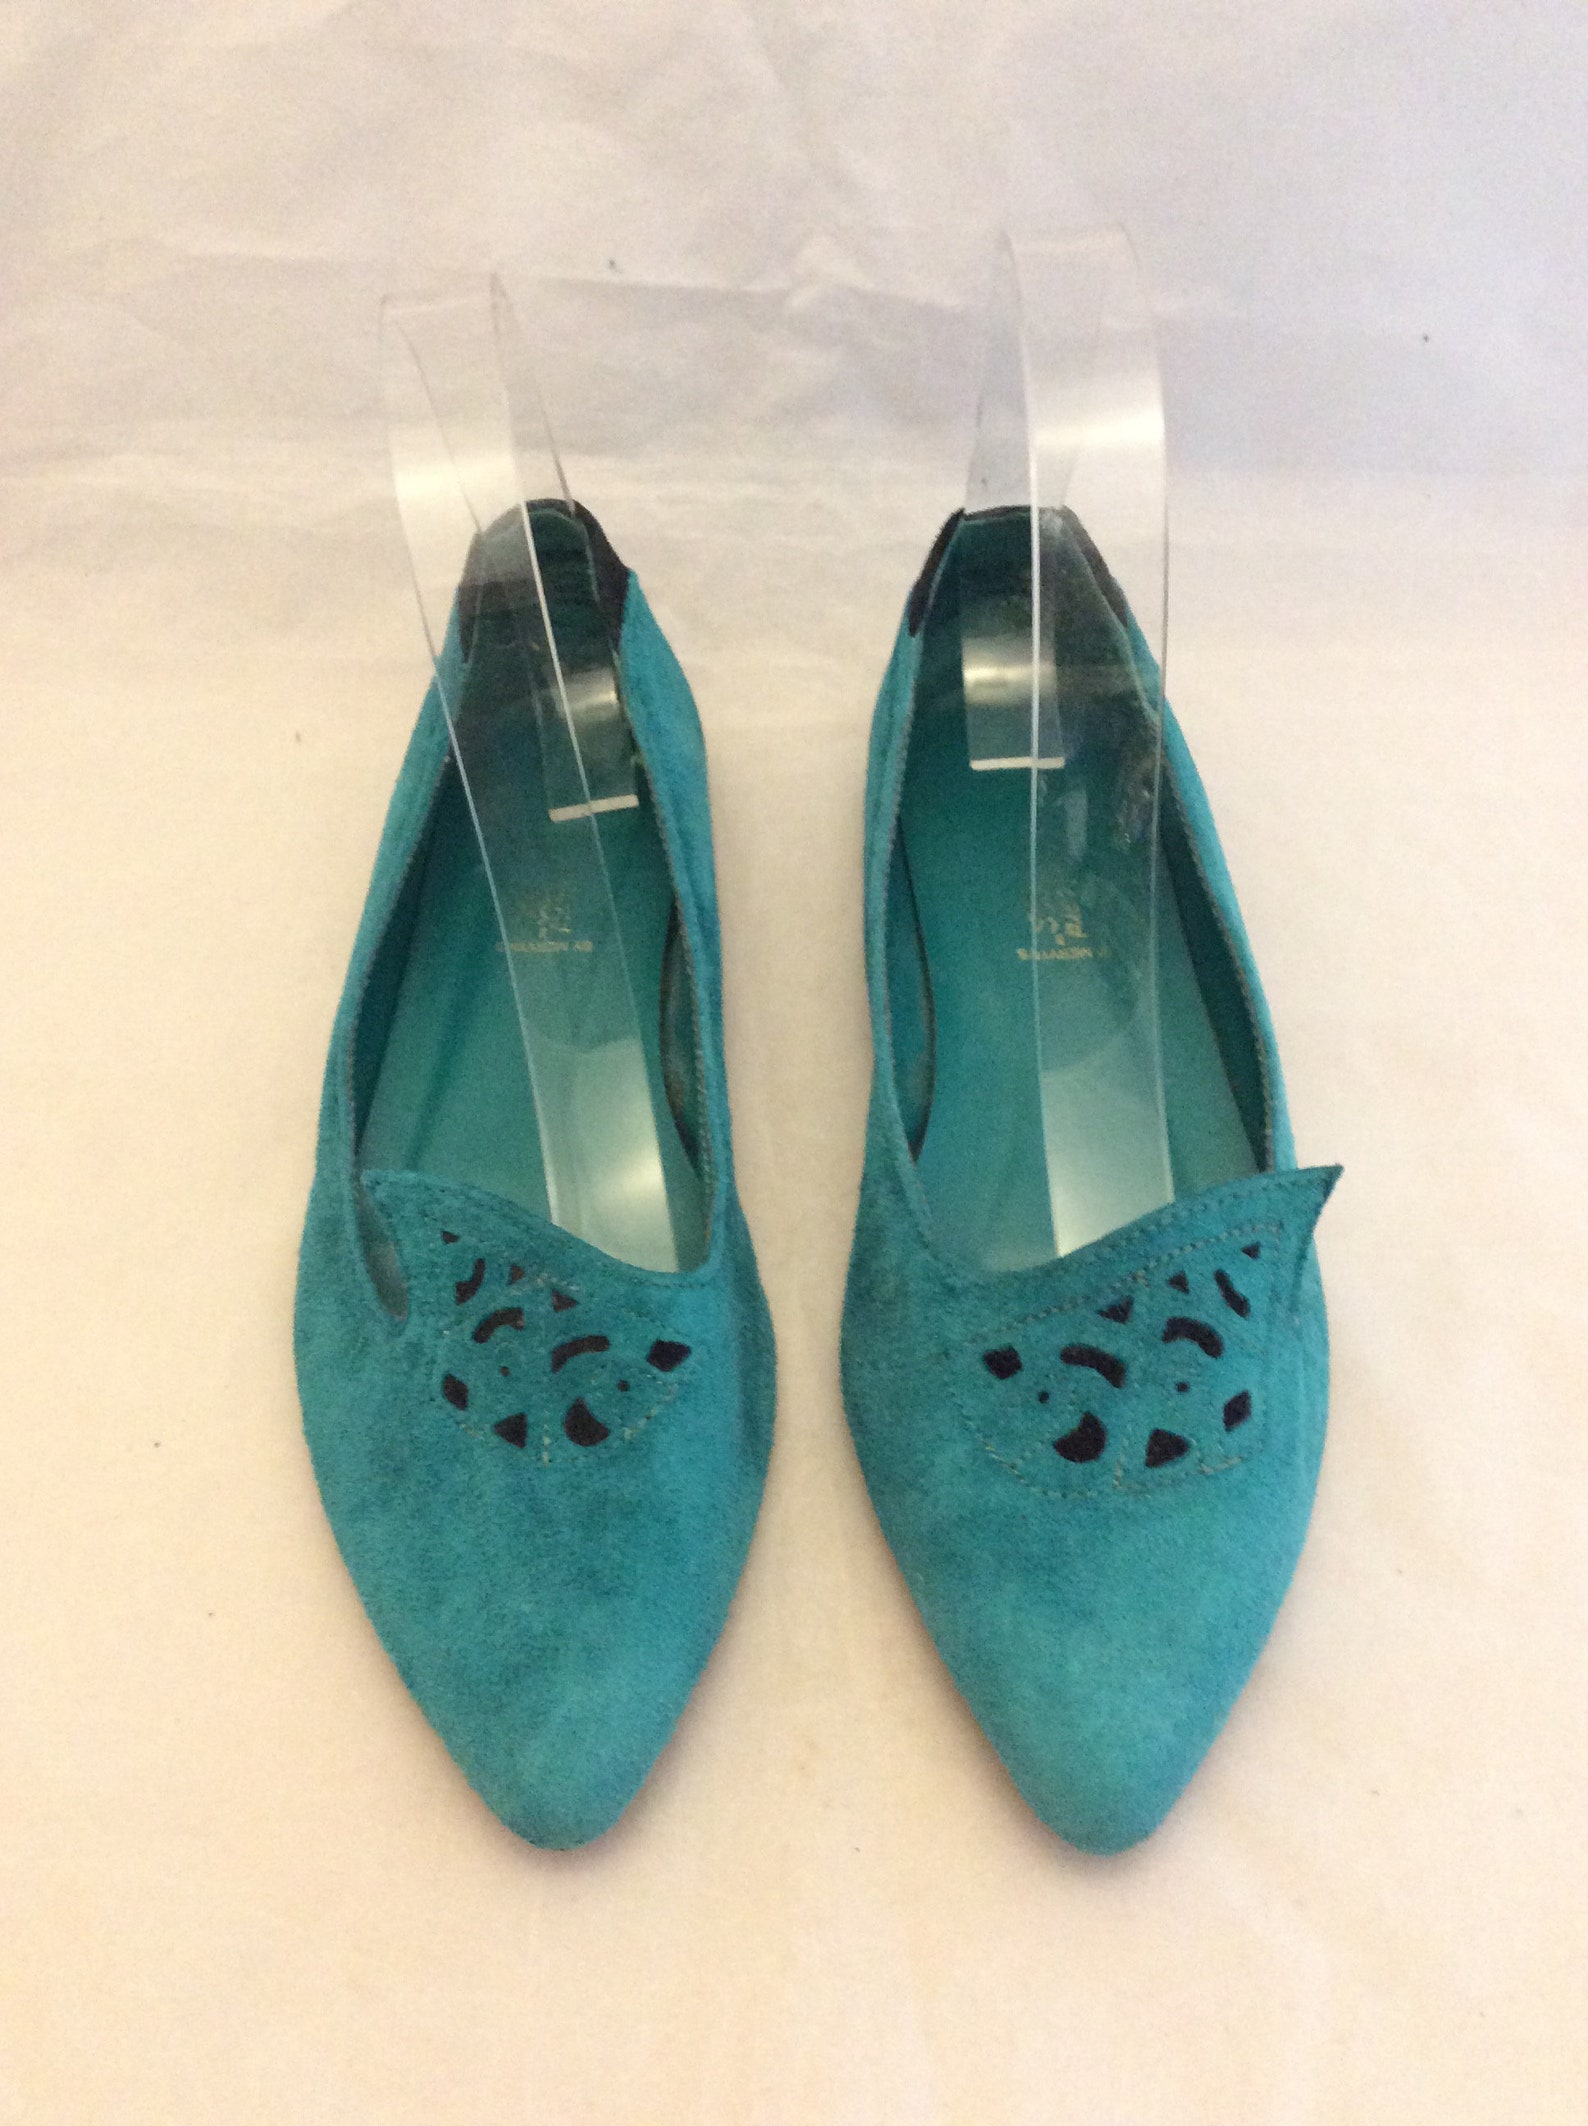 funky cut leather blue flats 80s ballet pointy by wildcard teal size 9 punk ook rare